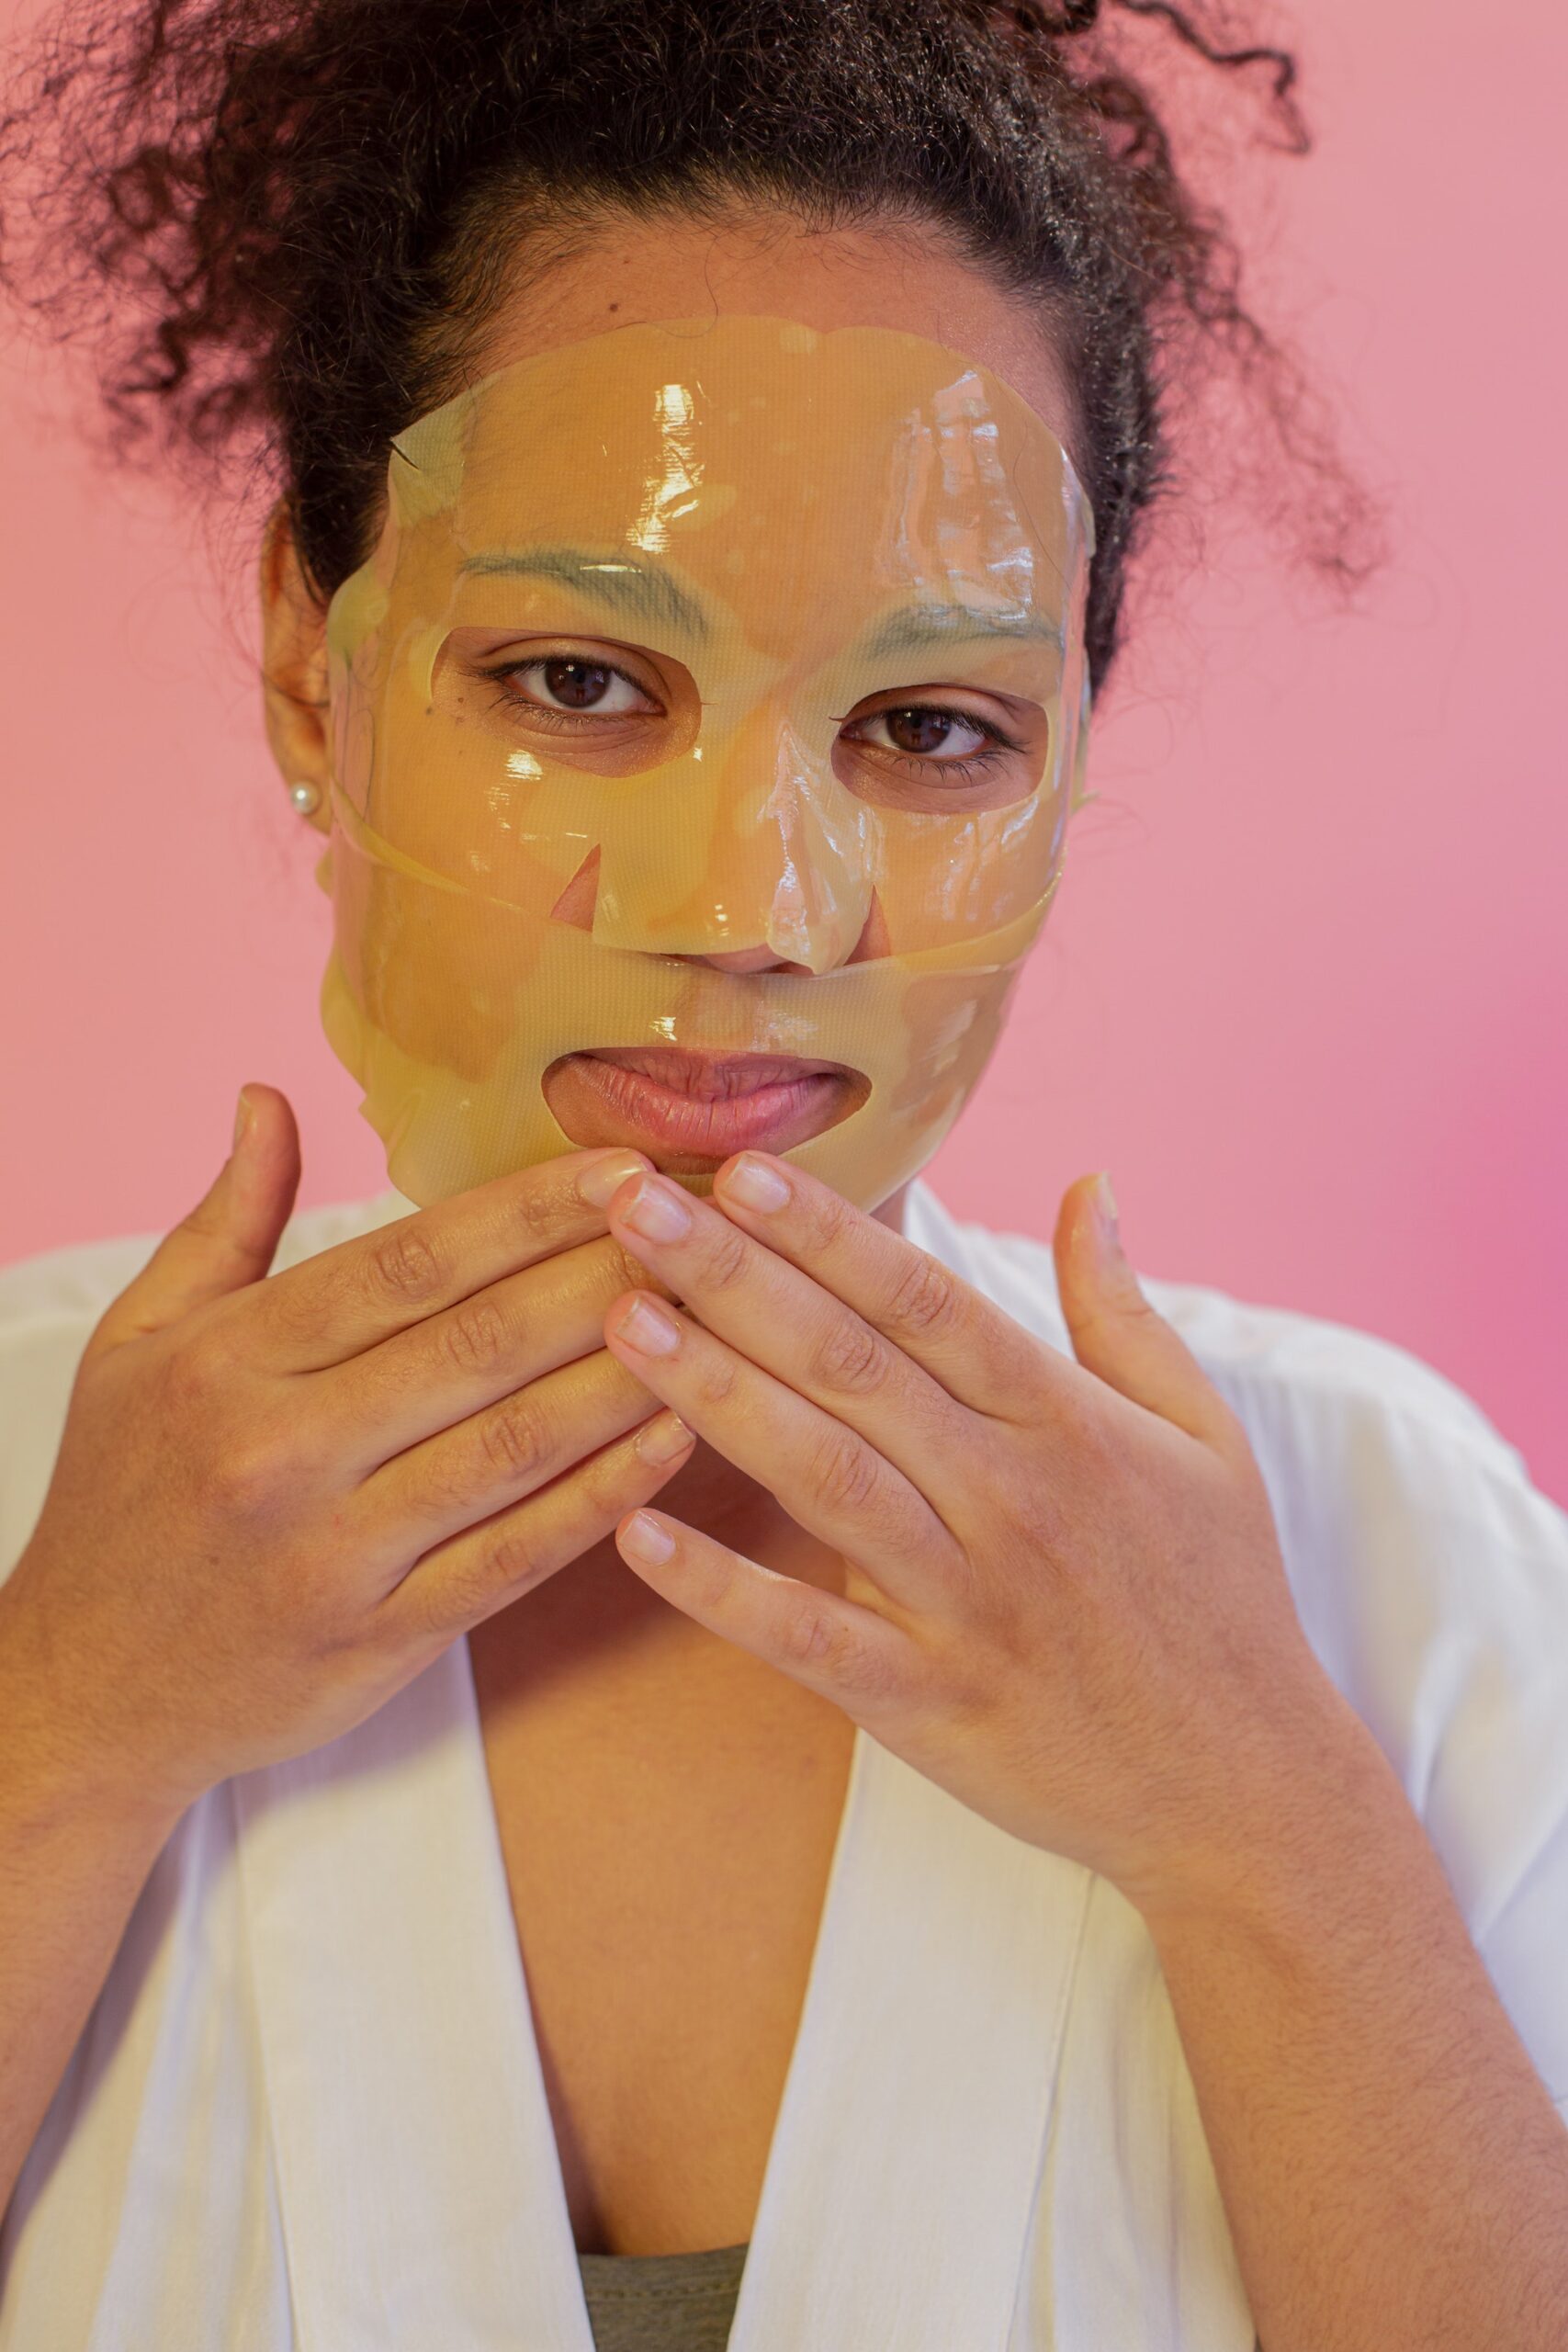 How to Make Sheet Masks Work for You